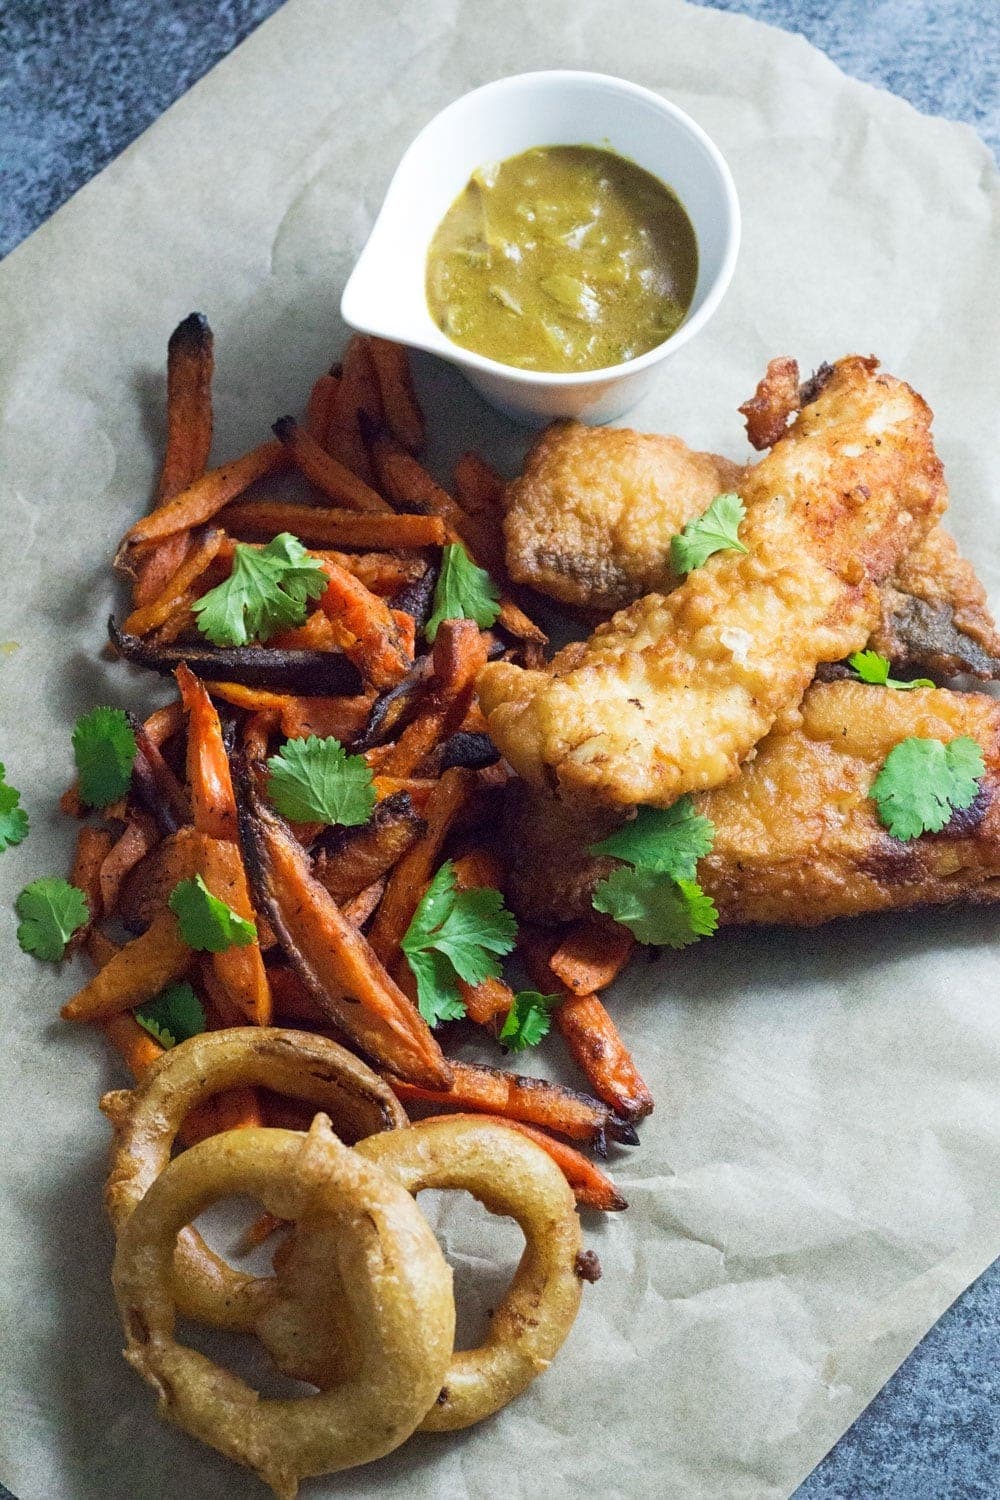 This Caribbean style fish and chips is made up of rum battered fish, sweet potato fries and an incredible coconut curry sauce!